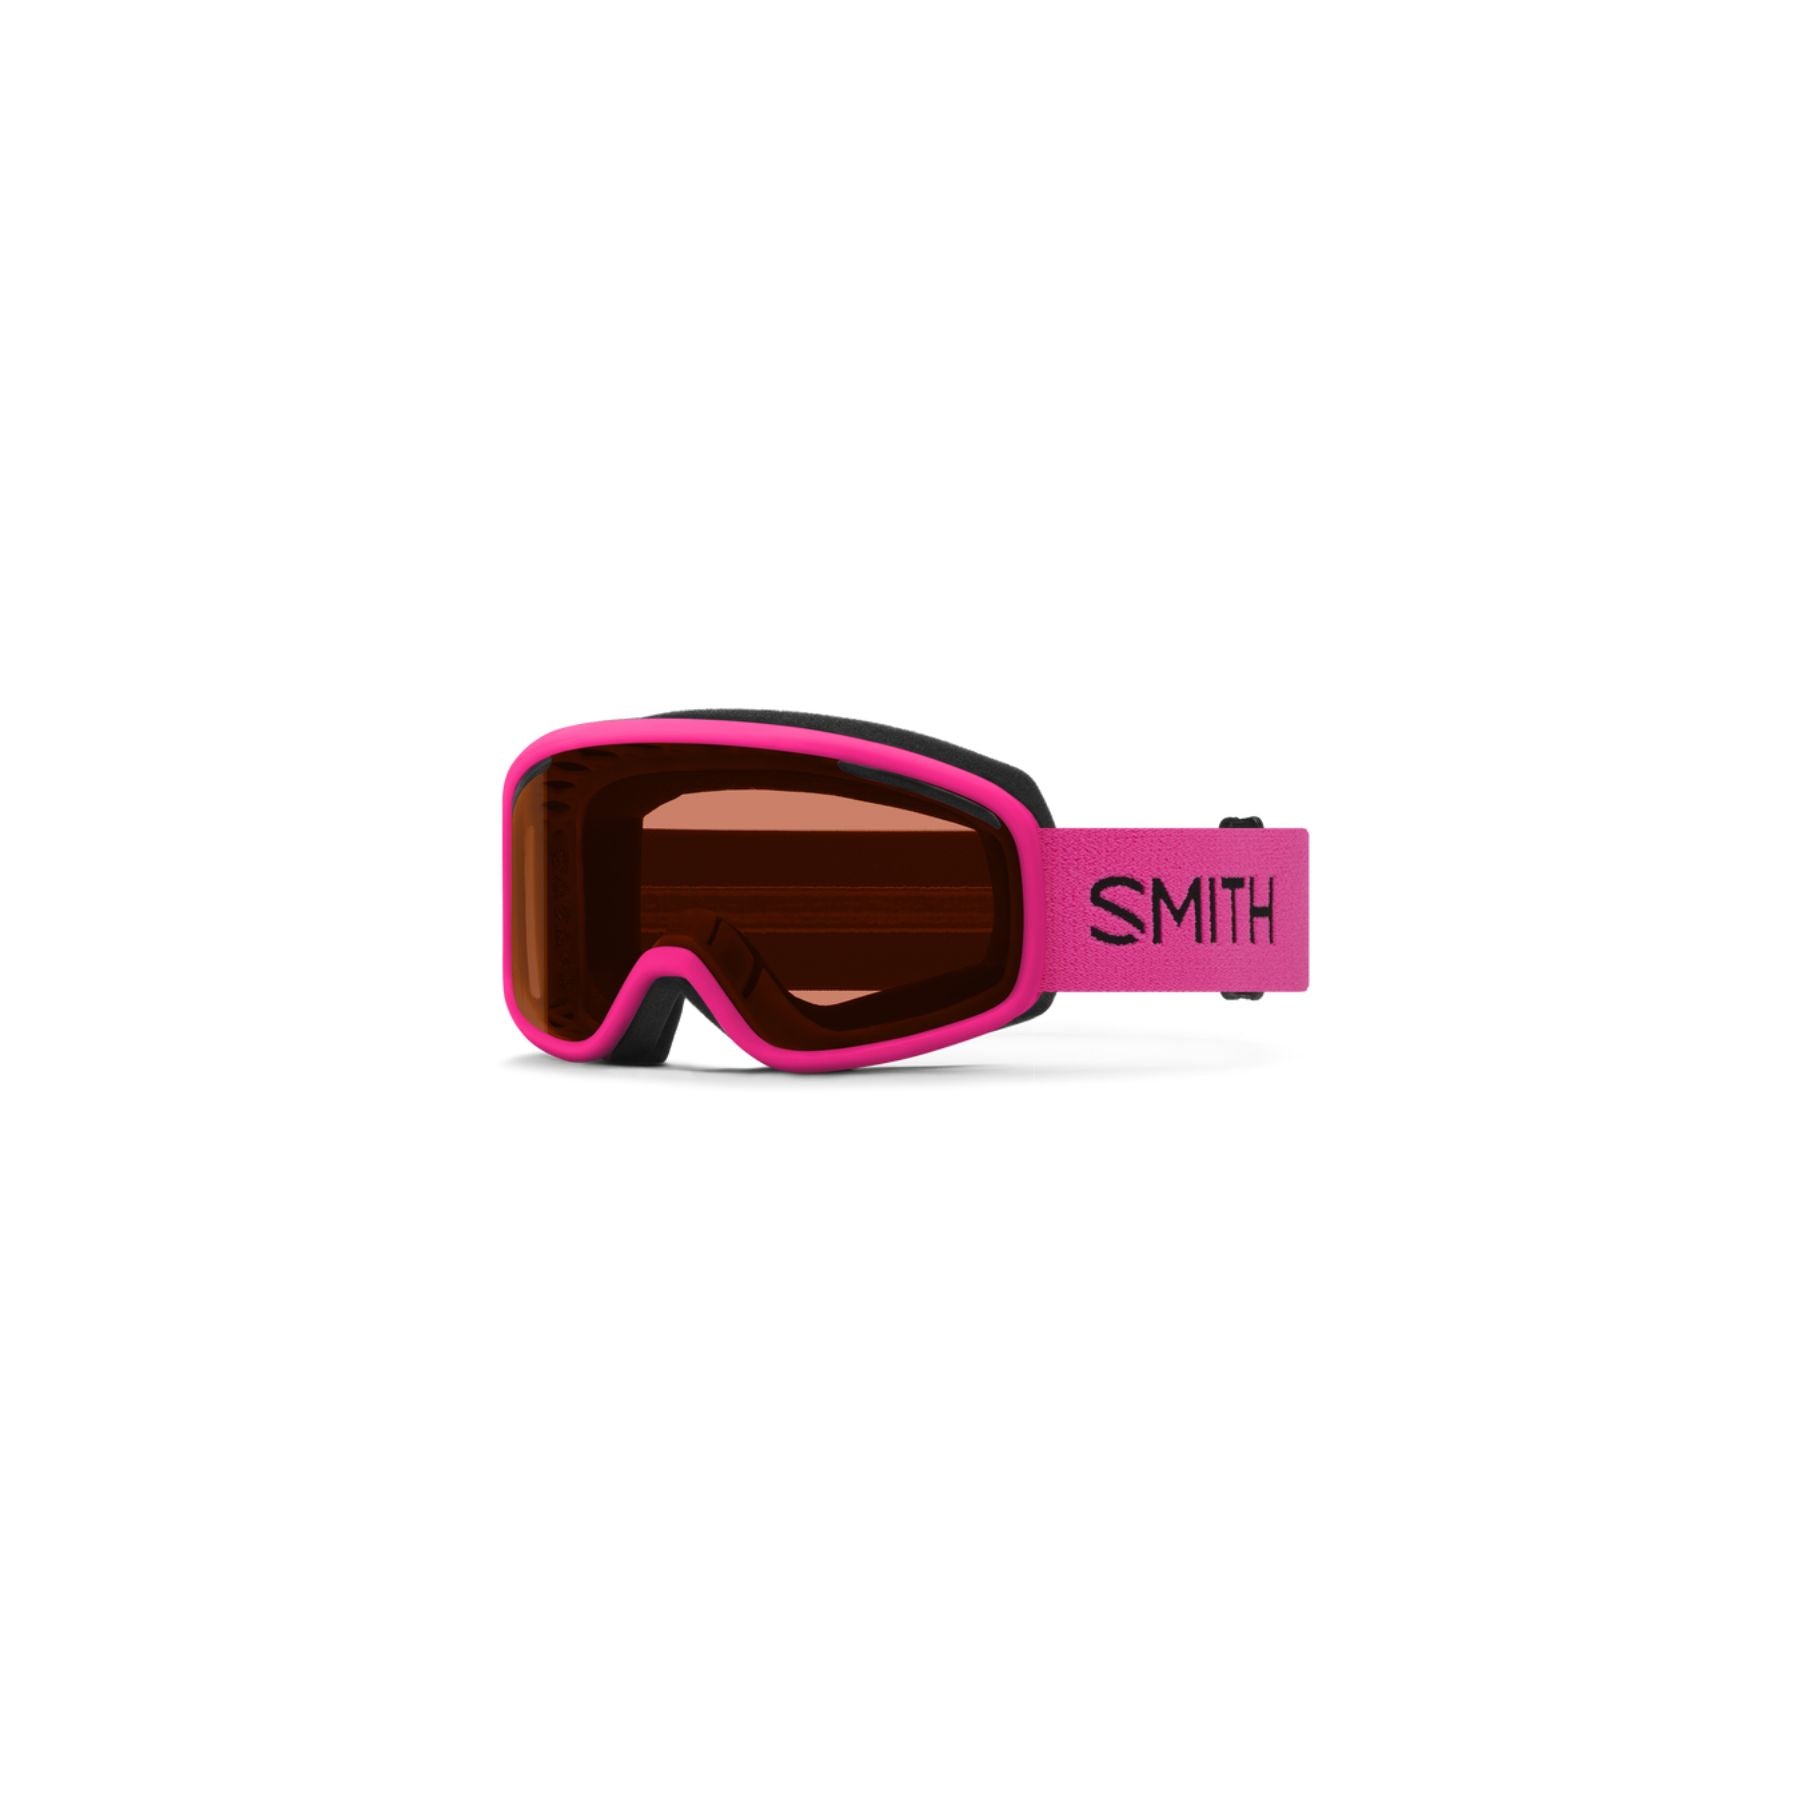 Smith Vogue Goggles in Lectric Flamingo